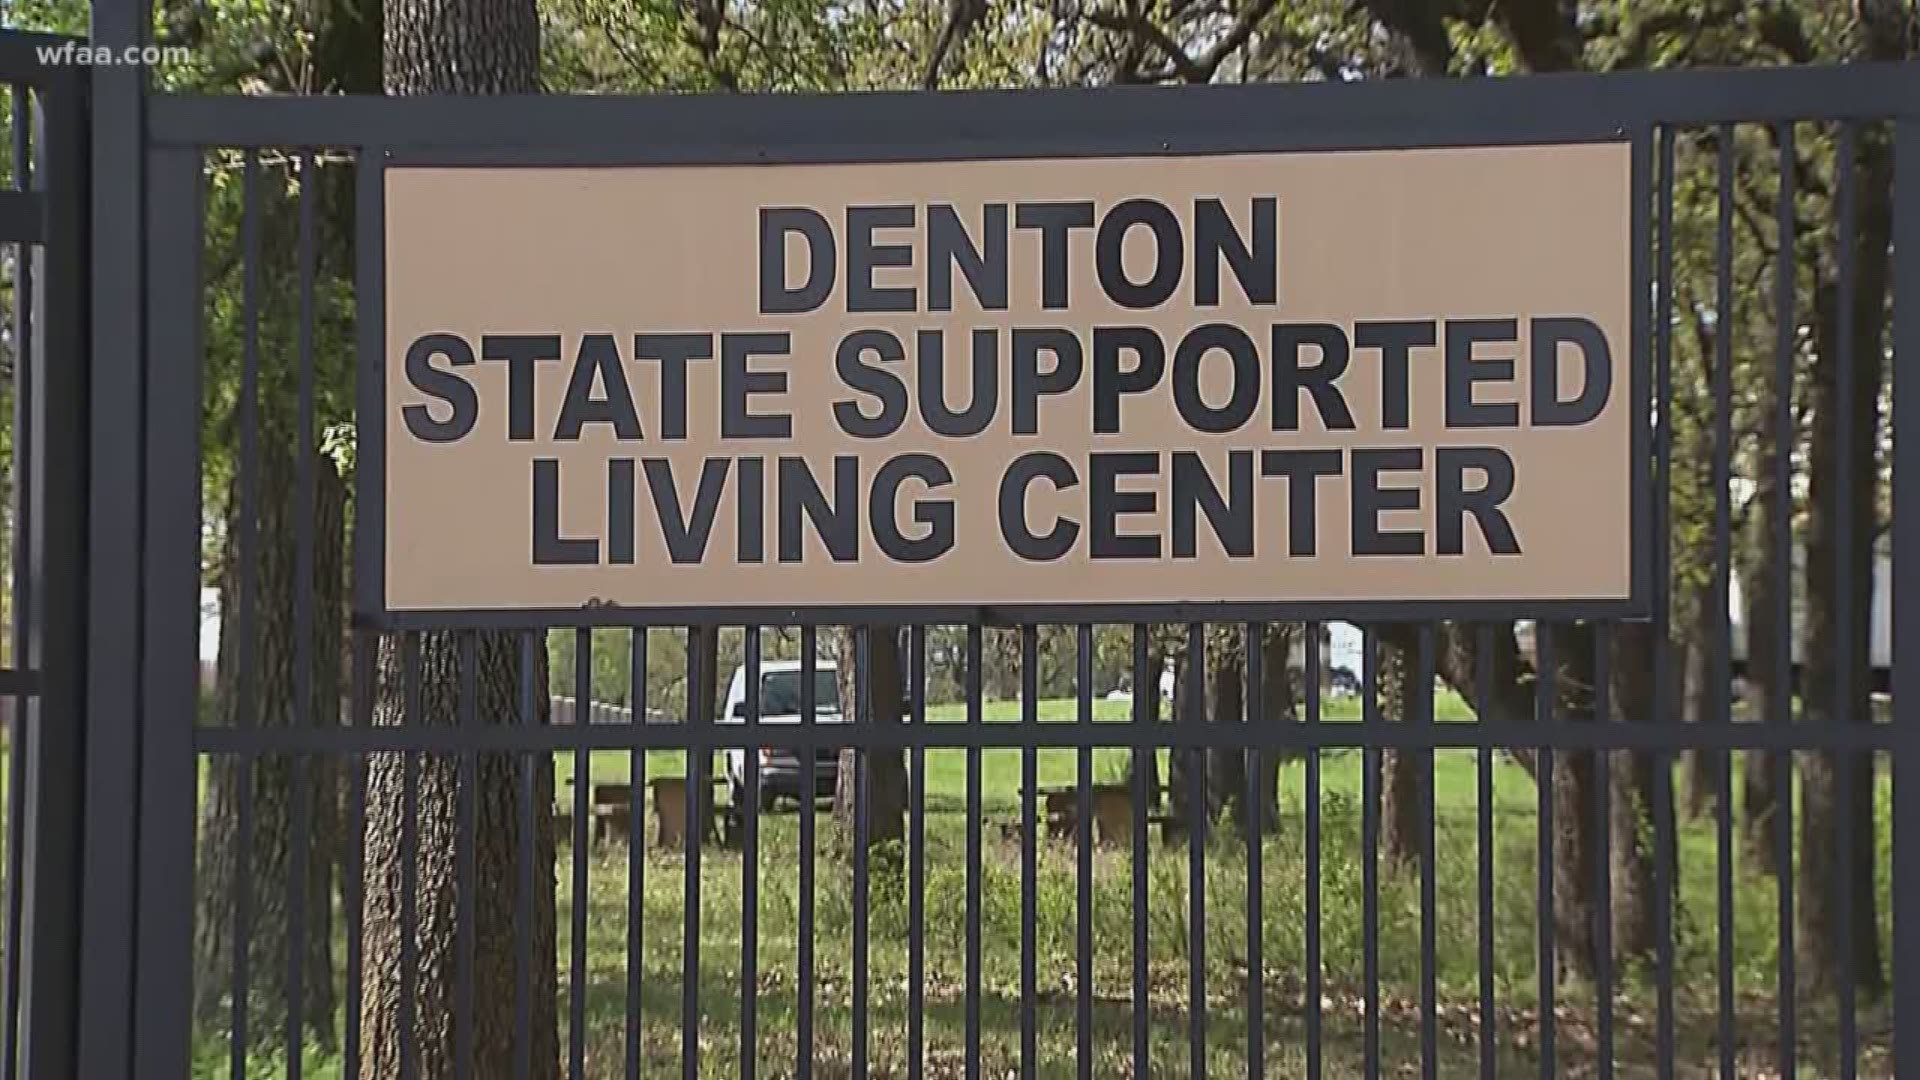 "This is an outbreak of a vulnerable population," the Denton County Public Health Director said.